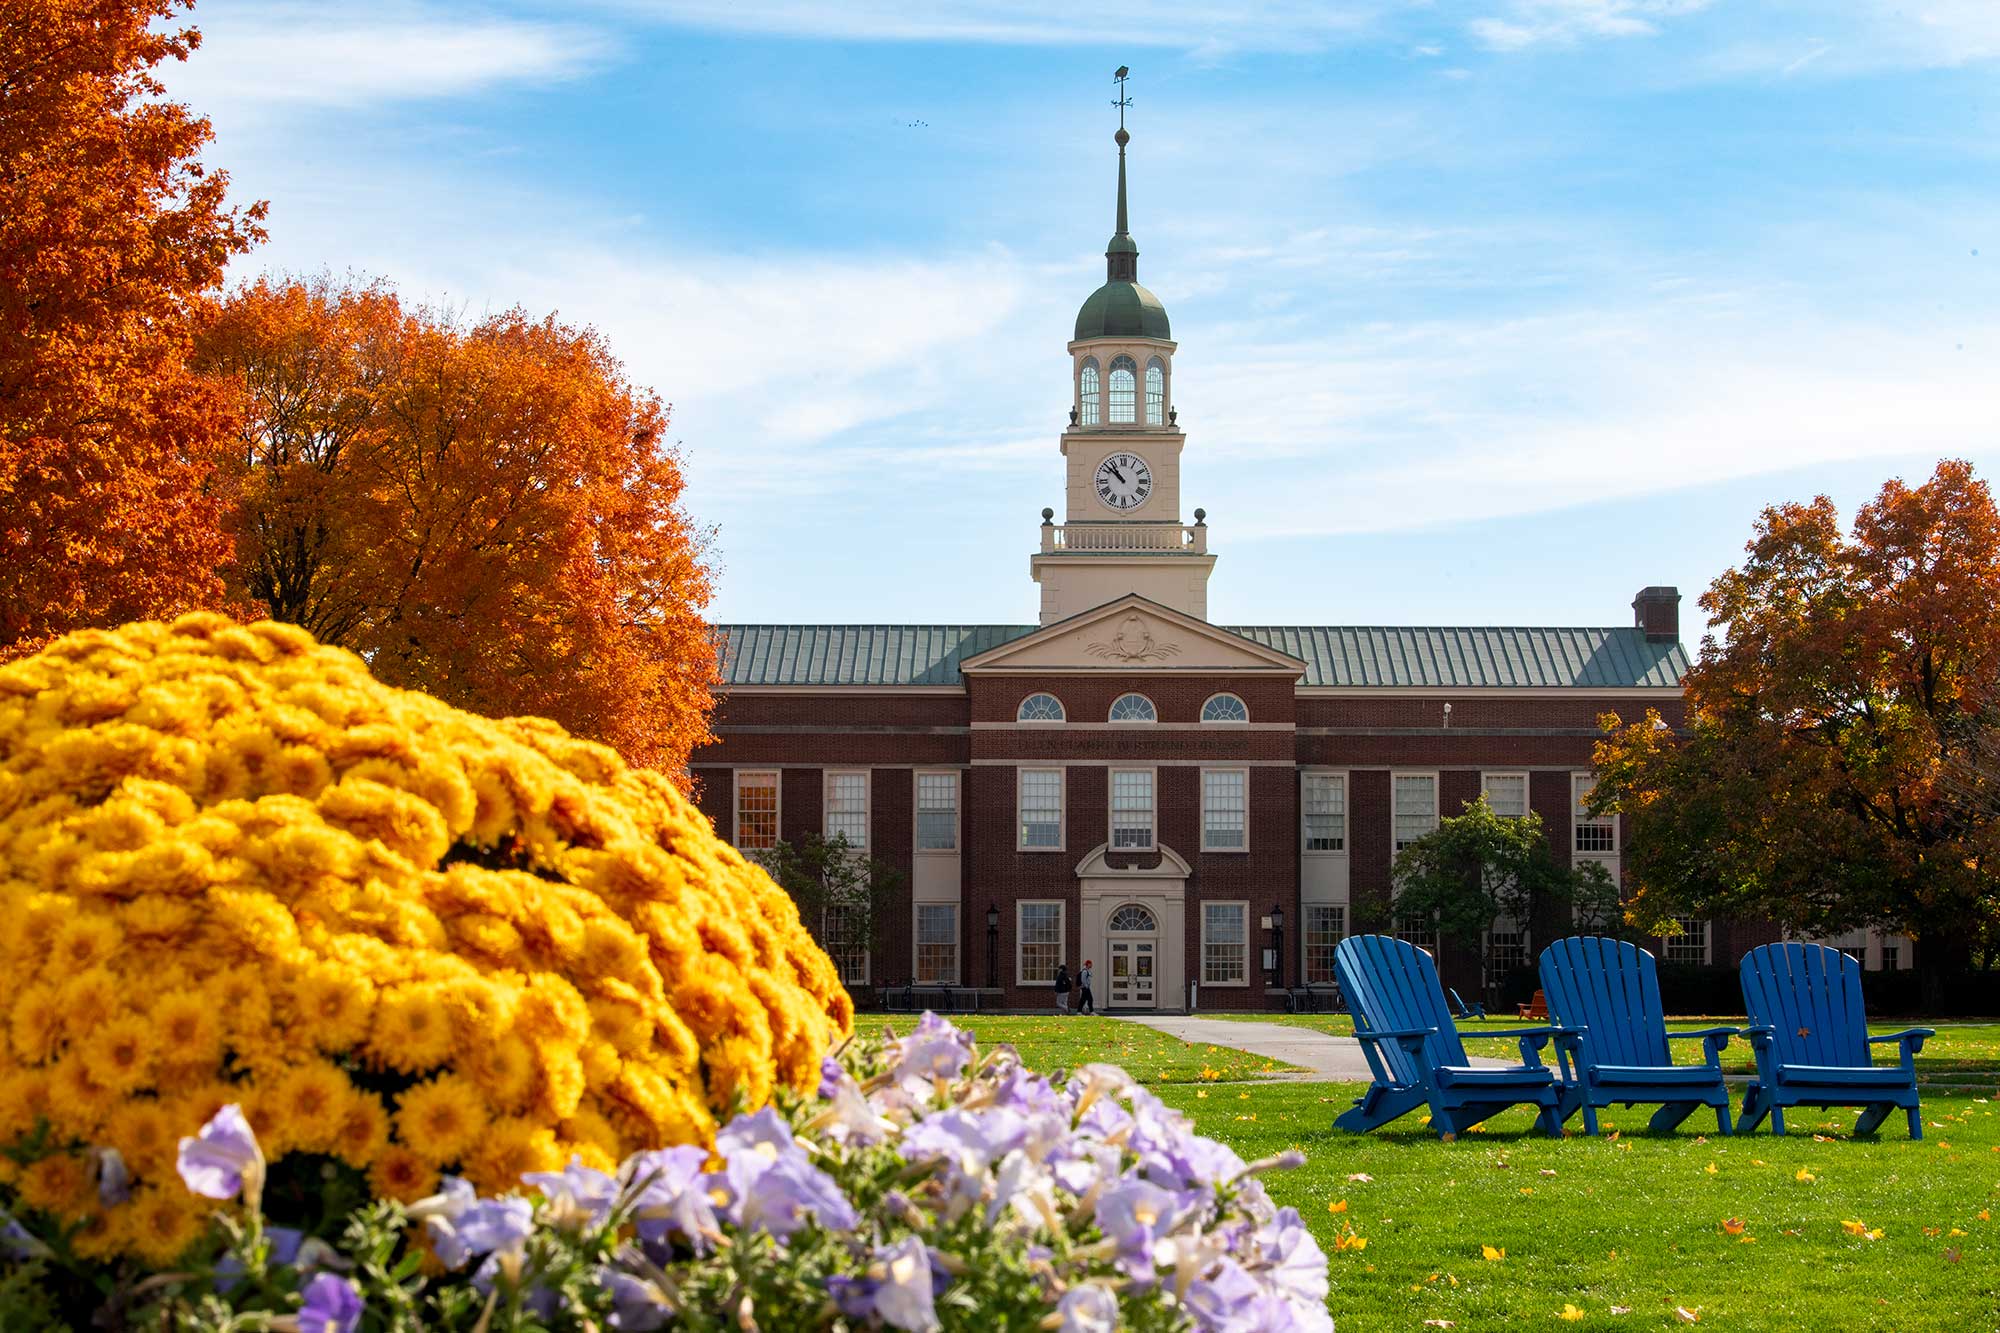 Bucknell courtyard with fall colored trees and three blue lawn chairs on grass